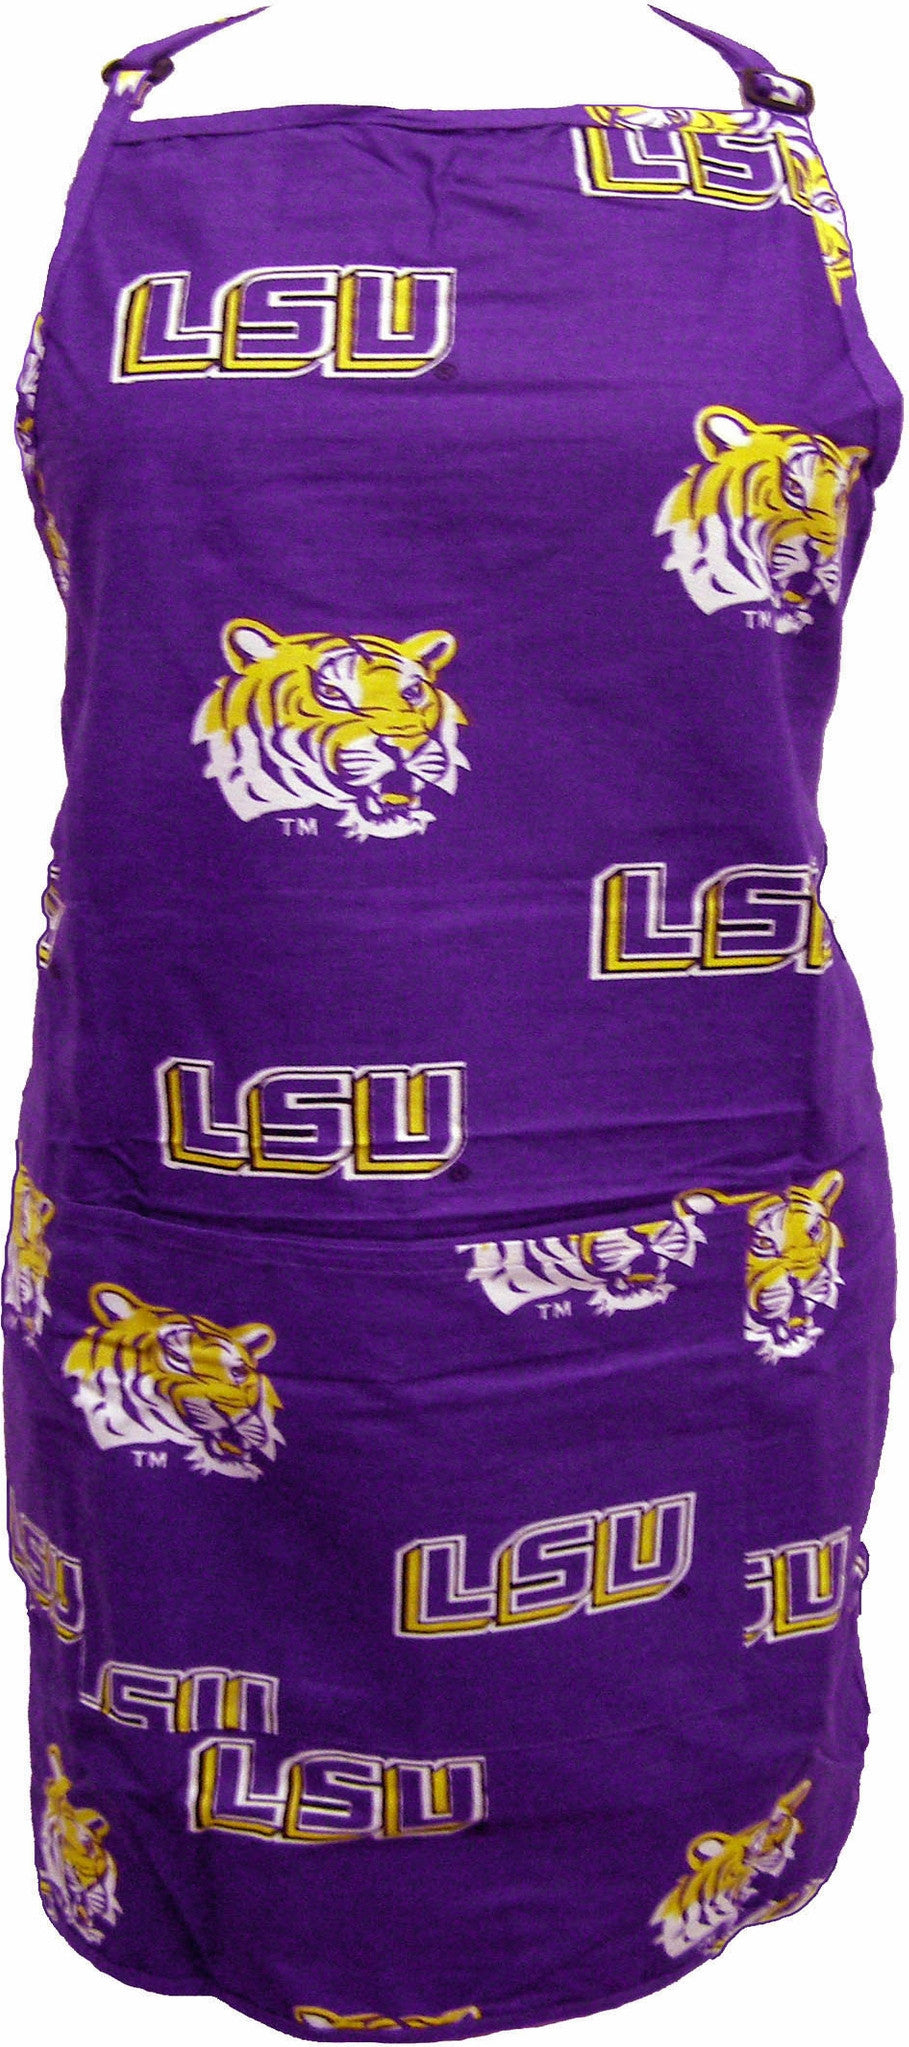 Lsu Apron 26"x35" With 9" Pocket - Lsuapr By College Covers